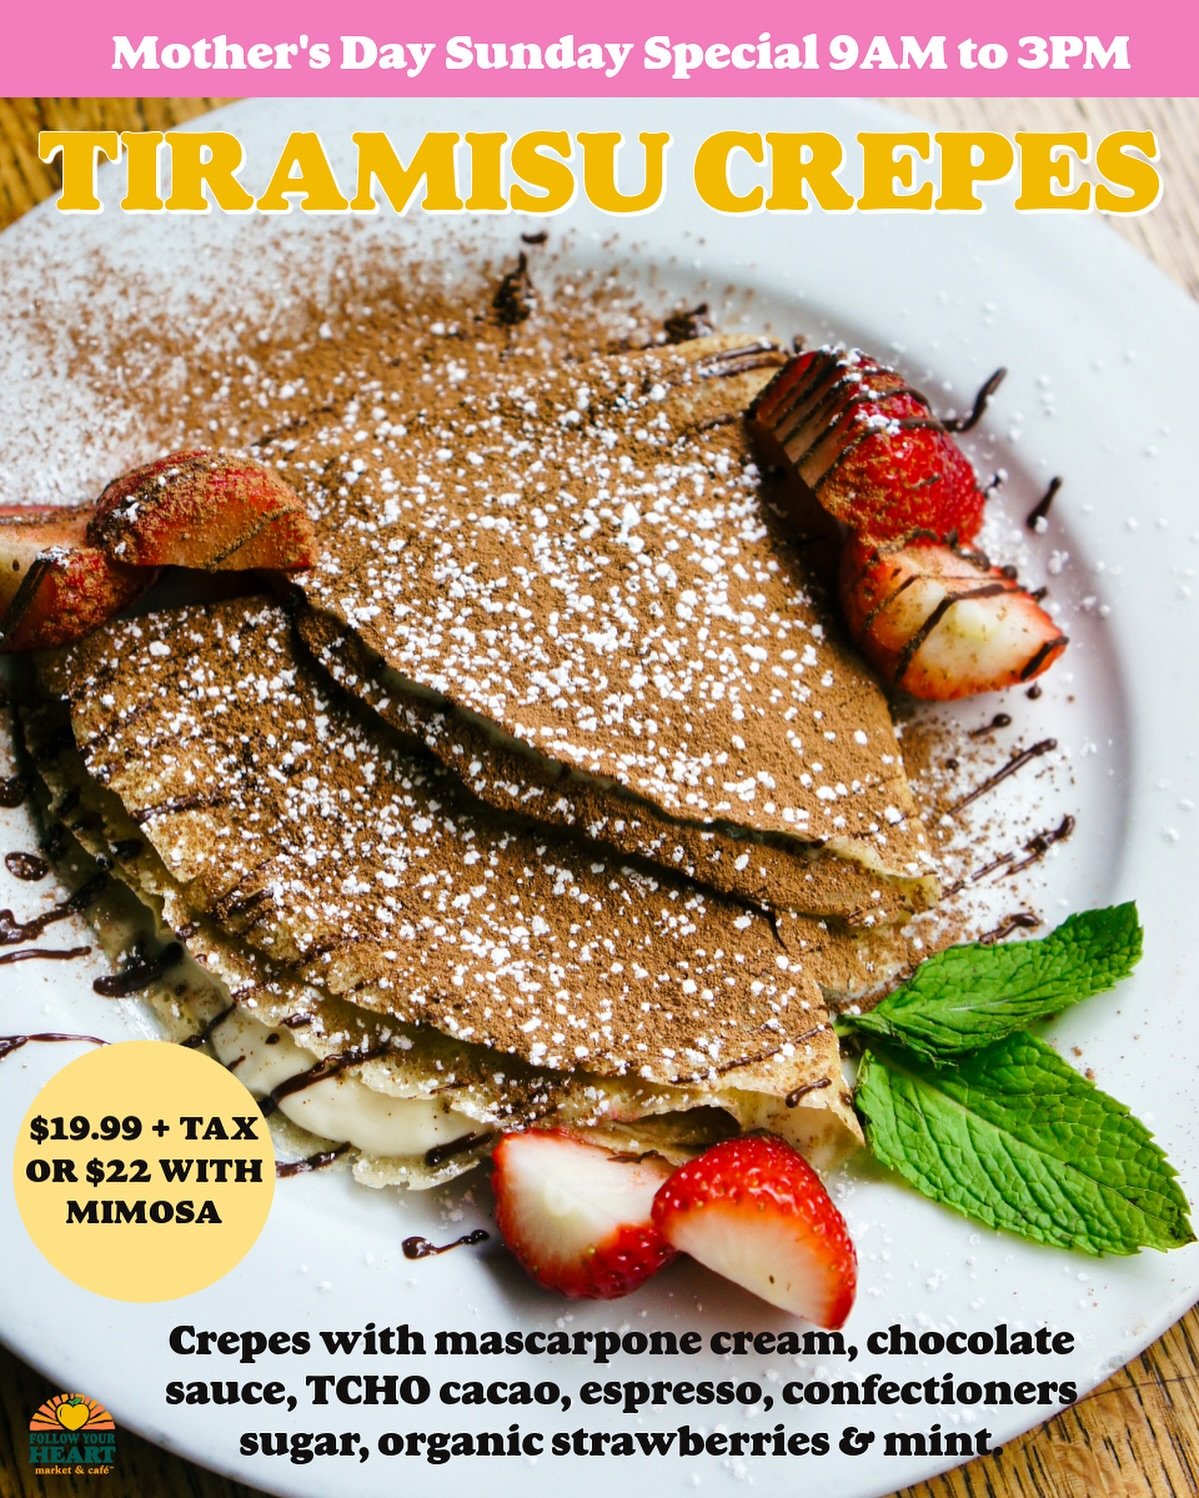 SUNDAY SPECIAL 💐 We&rsquo;re serving these Tiramisu Crepes to celebrate Mother&rsquo;s Day this year! ✨ You can&rsquo;t go wrong with taking mom out for a sweet breakfast, are we right? 🥰

Two housemade vegan crepes filled with mascarpone cream, dr